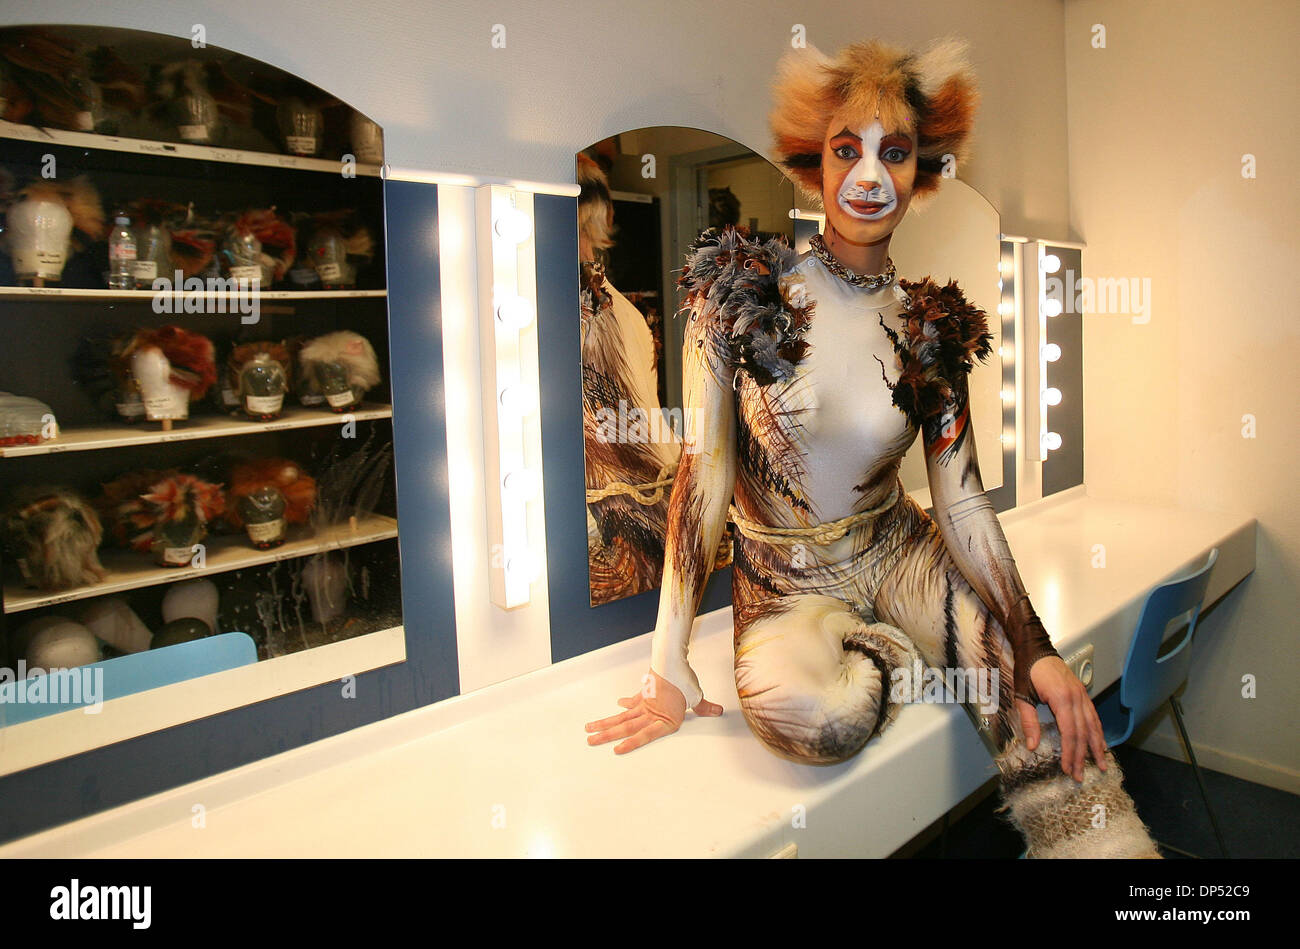 Amsterdam, Netherlands - Stage Actors preparing 'Cats' performance Stock Photo